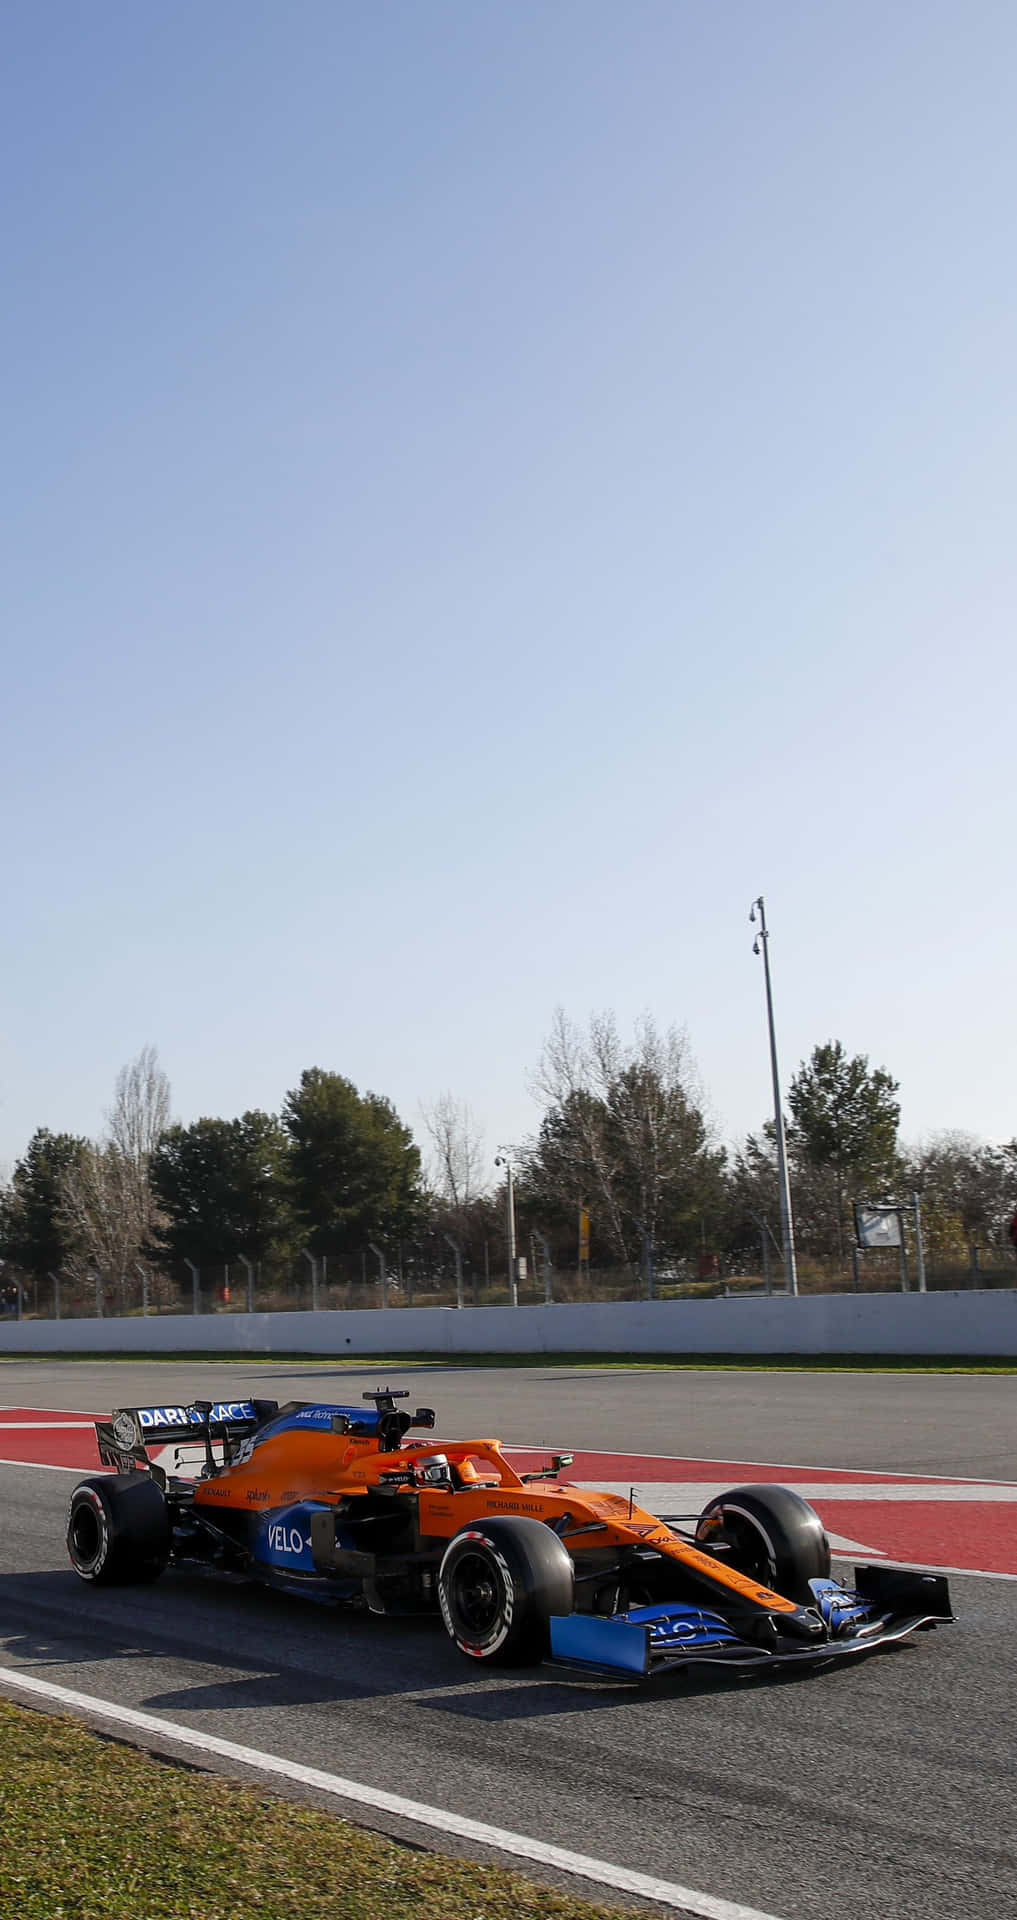 A Blue And Orange Racing Car On A Track